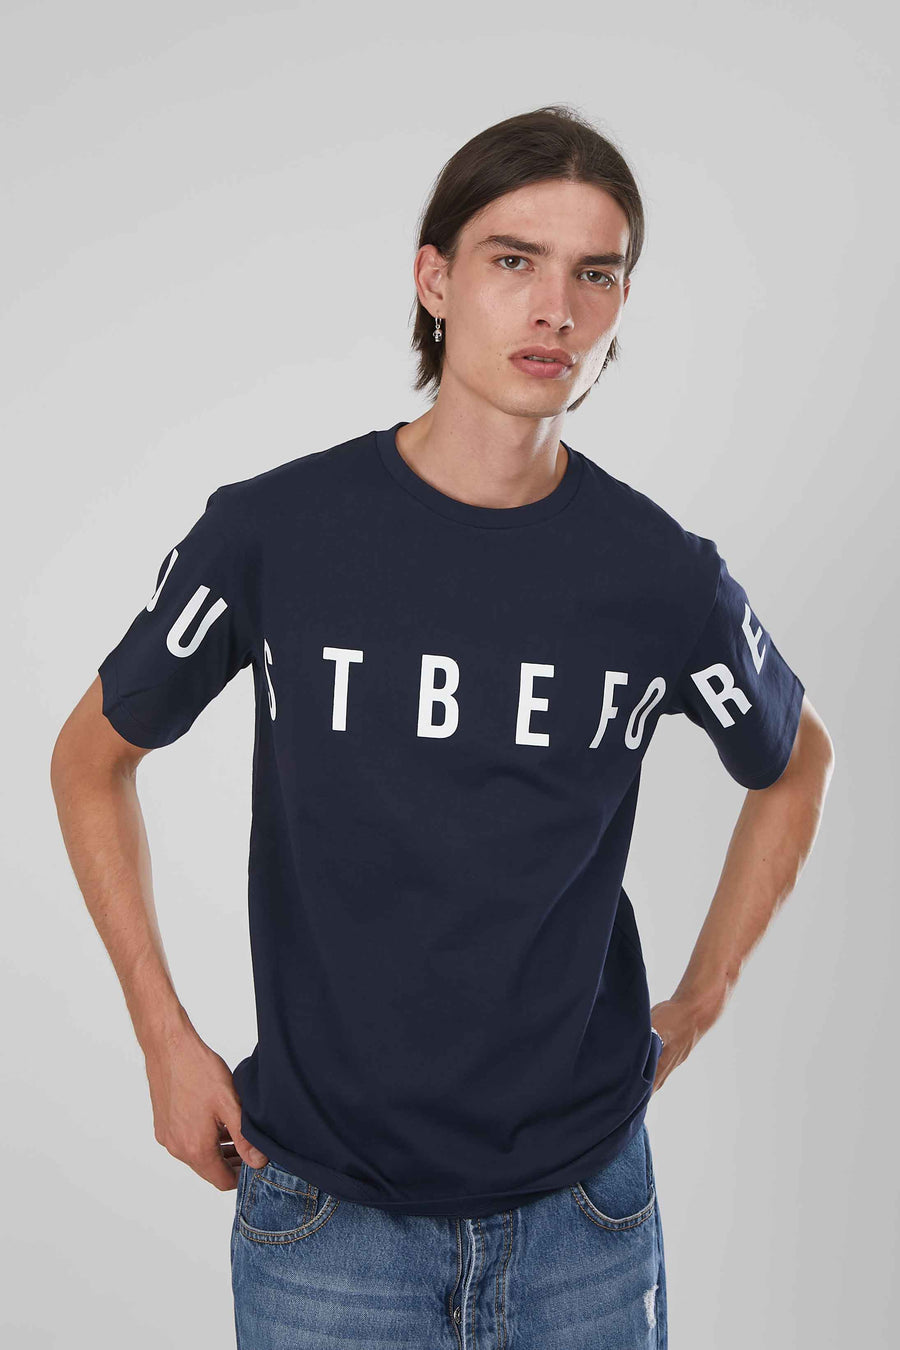 T-SHIRT JUST BEFORE NAVY